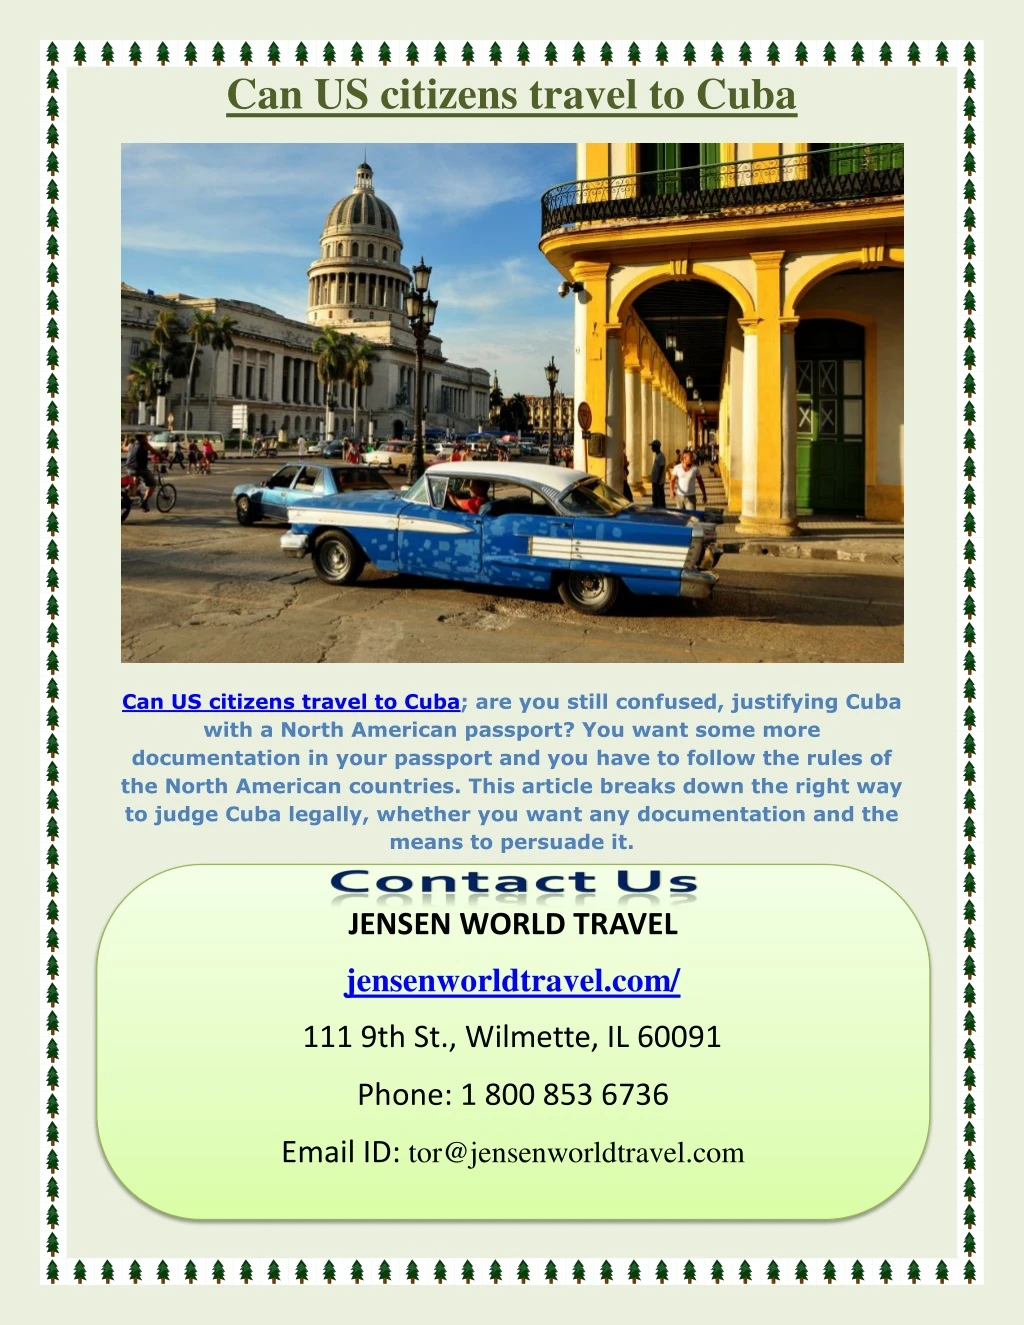 PPT Can US citizens travel to Cuba PowerPoint Presentation, free